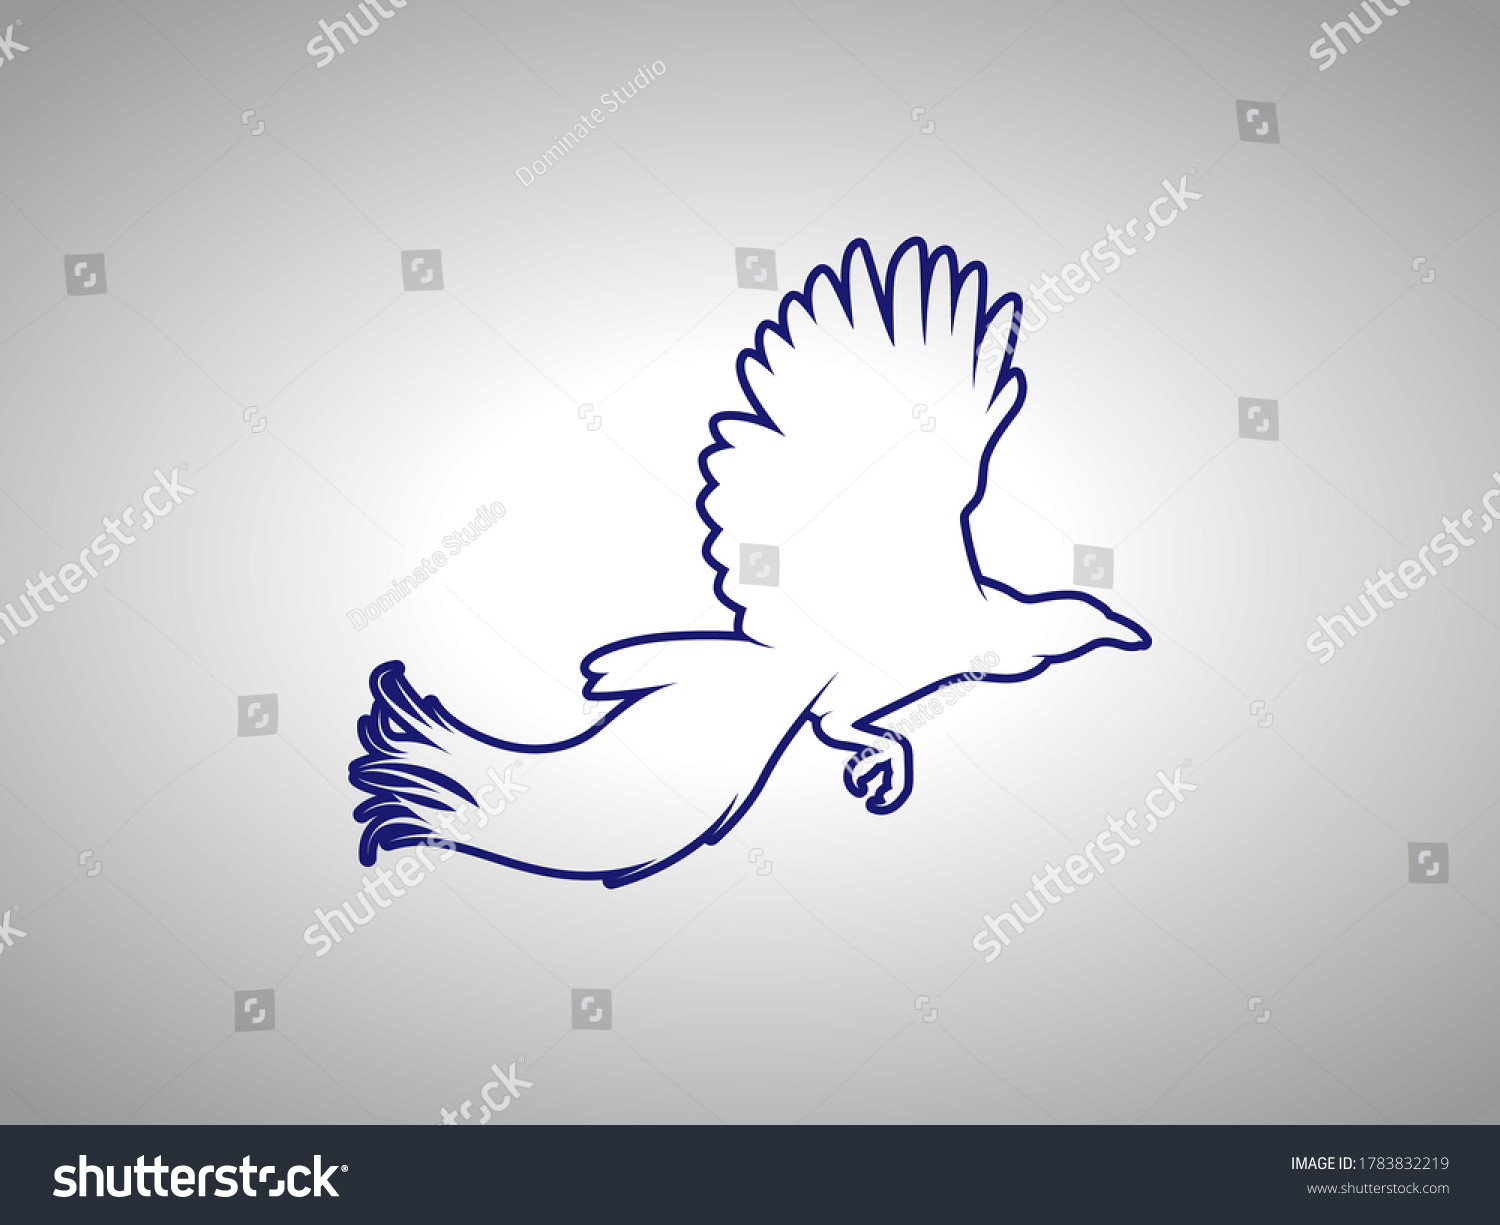 SVG of Cendrawasih Silhouette on White Background. Isolated Vector Animal Template for Logo Company, Icon, Symbol etc svg